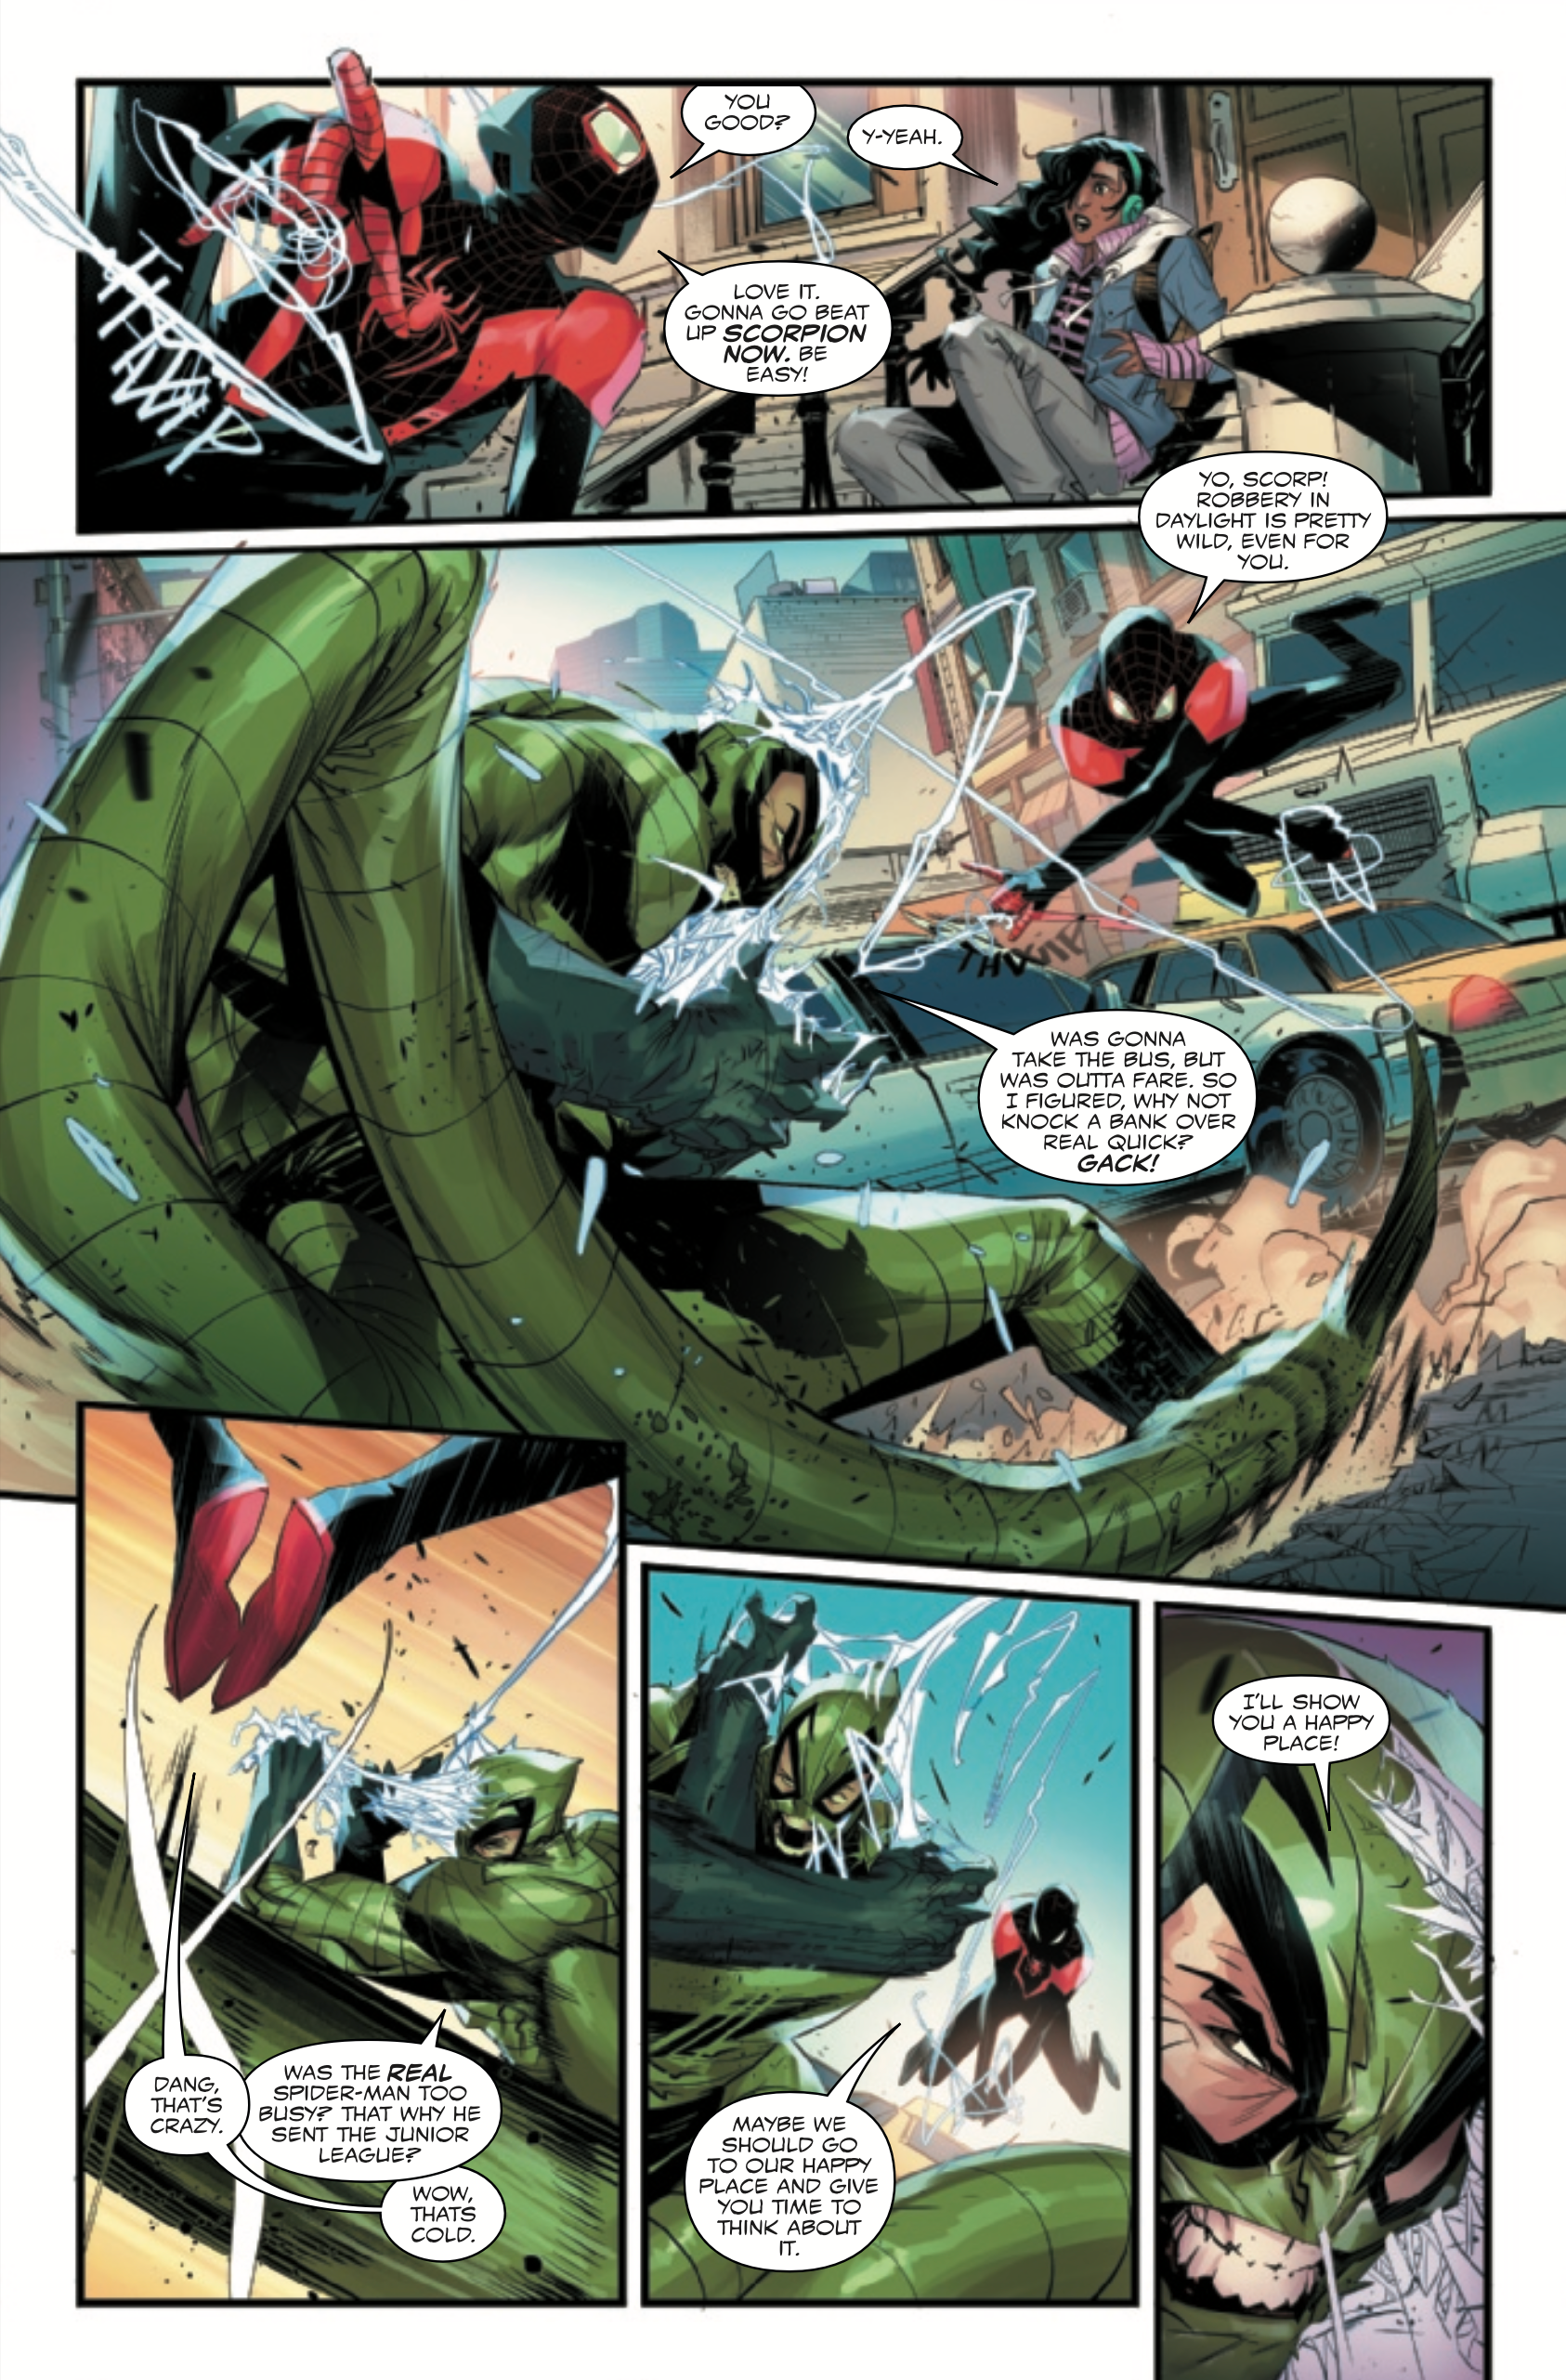 Miles Morales fights the Scorpion